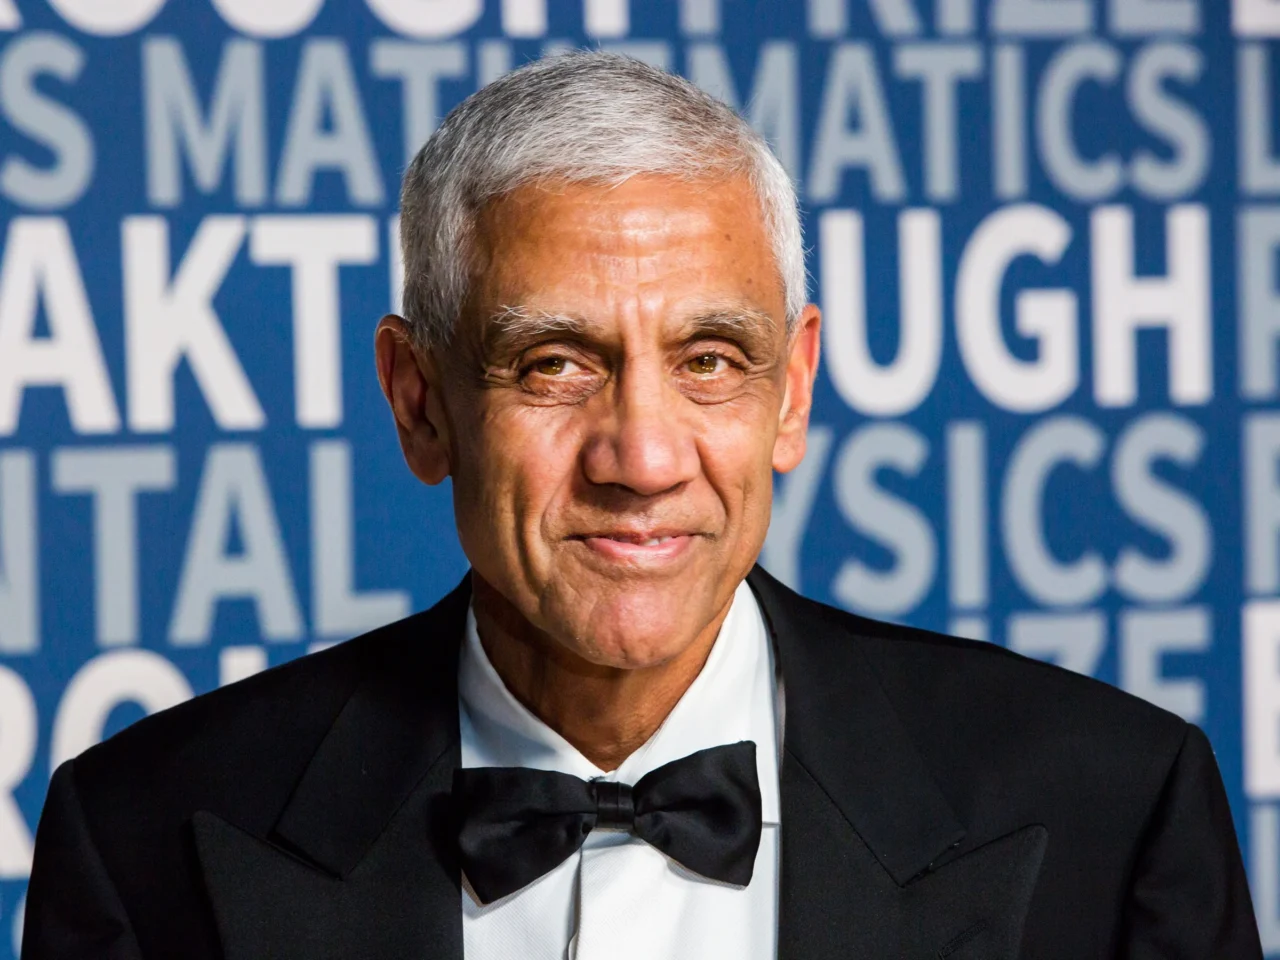 Douglas Flora: How about a thought-provoking Monday morning Vinod Khosla?